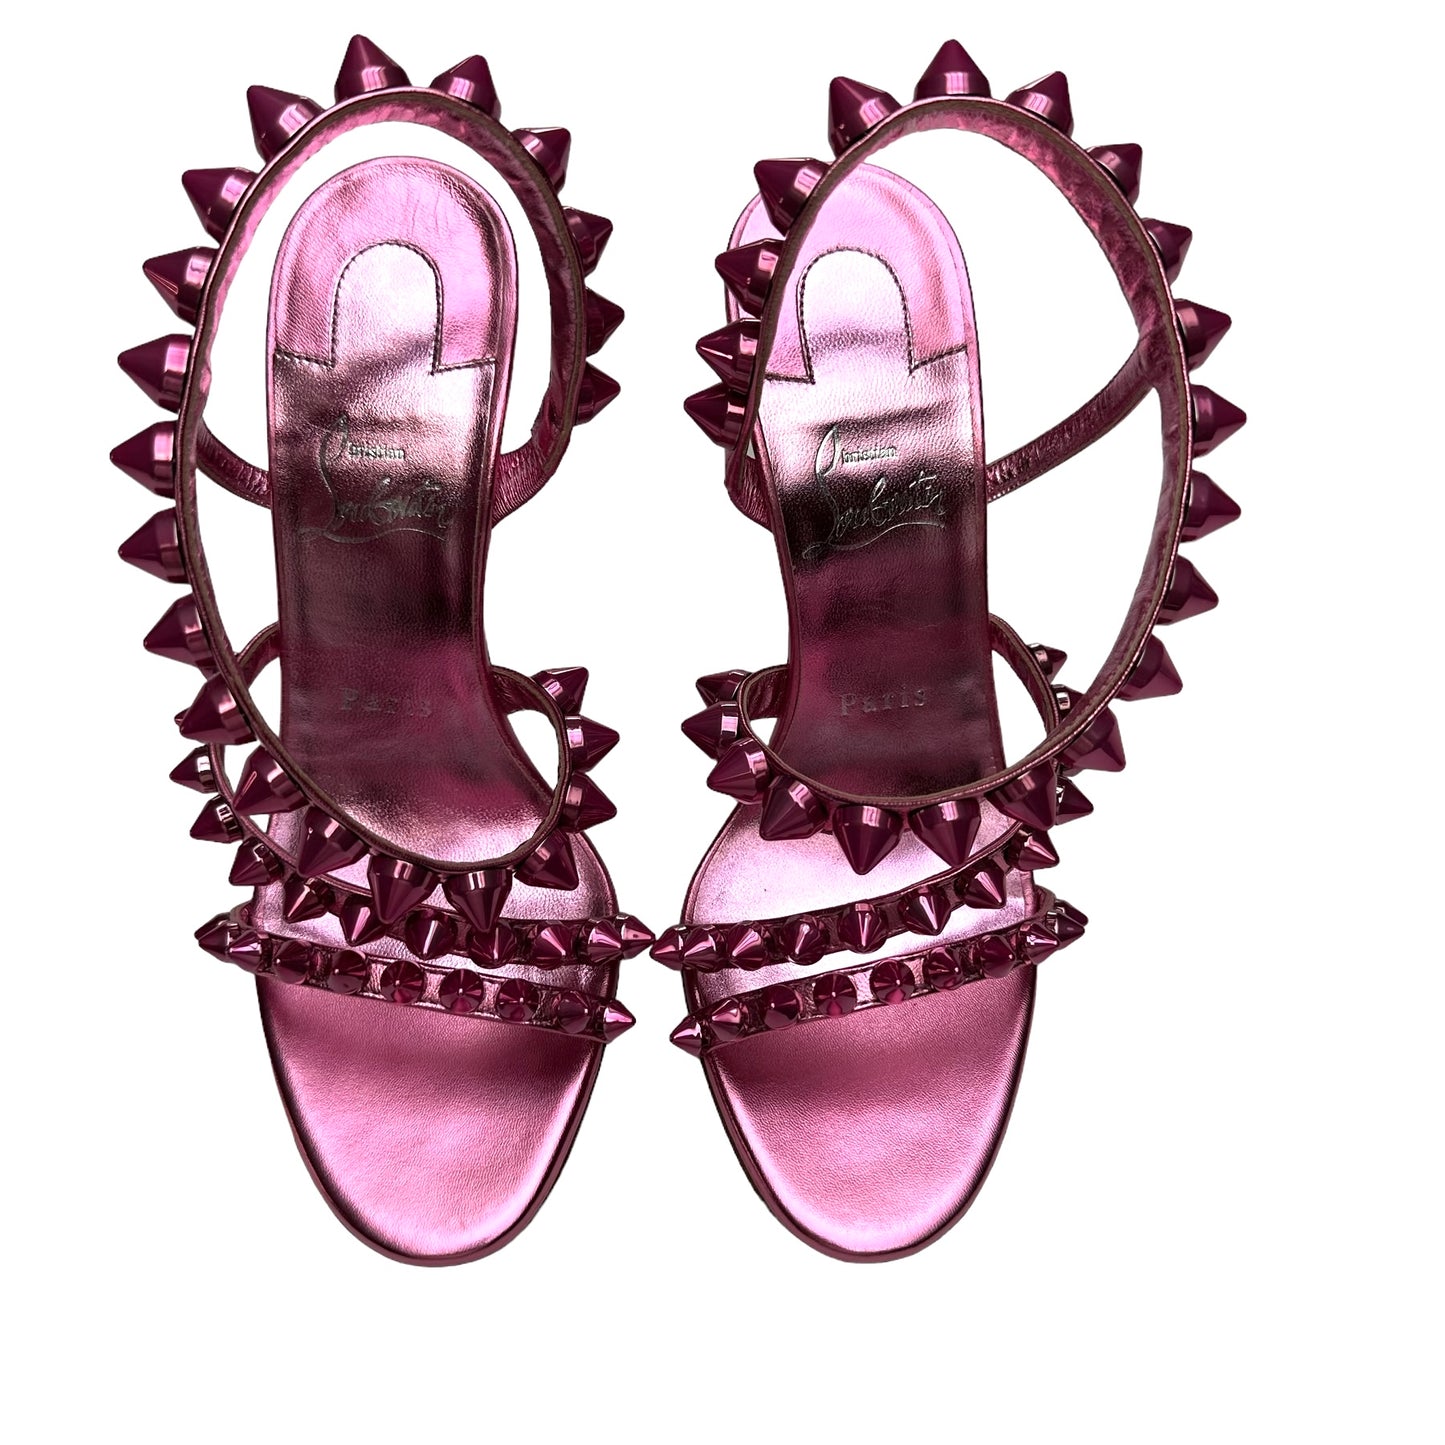 Pink Patent Heels w/Spikes - 7.5